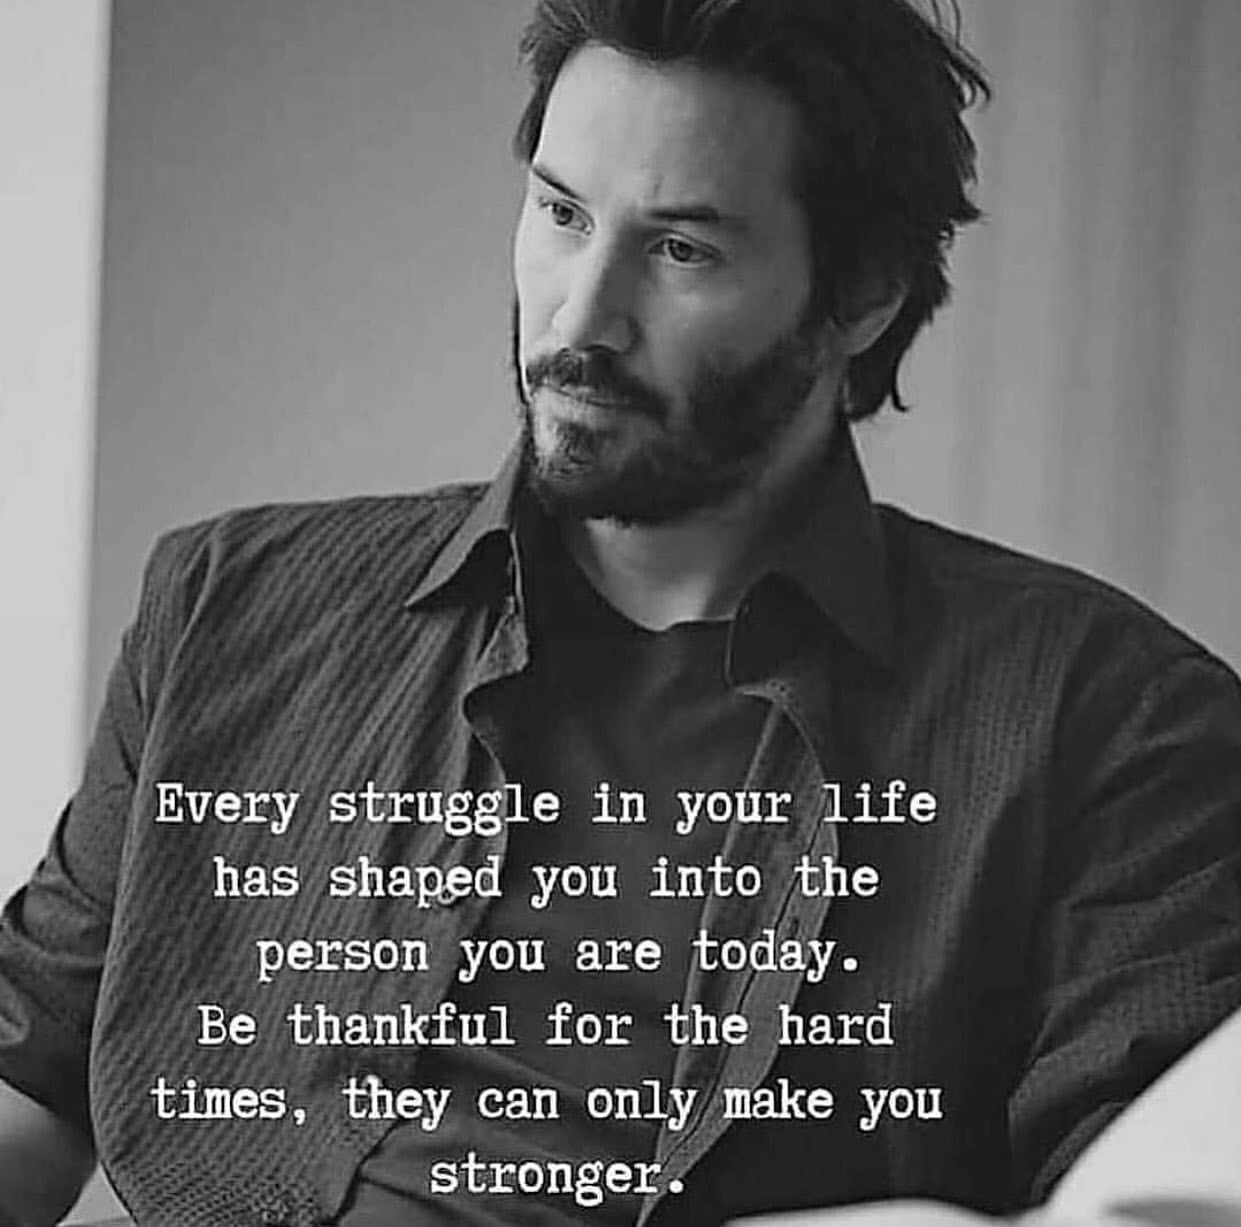 Every struggle in your life has shaped you into the person you are today. Be thankful for the hard times, they can only make you stronger.